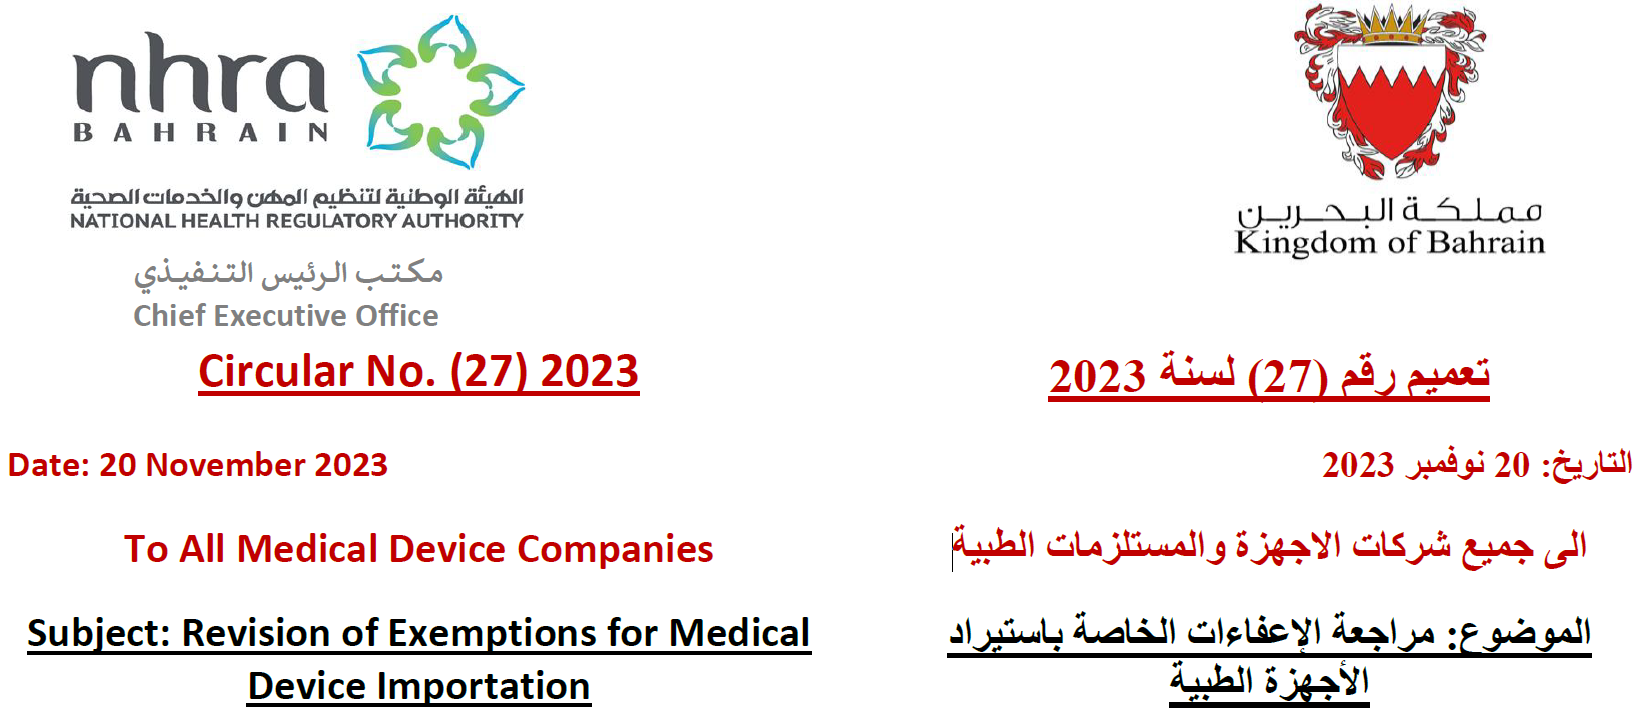 Circular No. (27) 2023: To All Medical Device Companies - Revision of Exemptions for Medical Device Importation